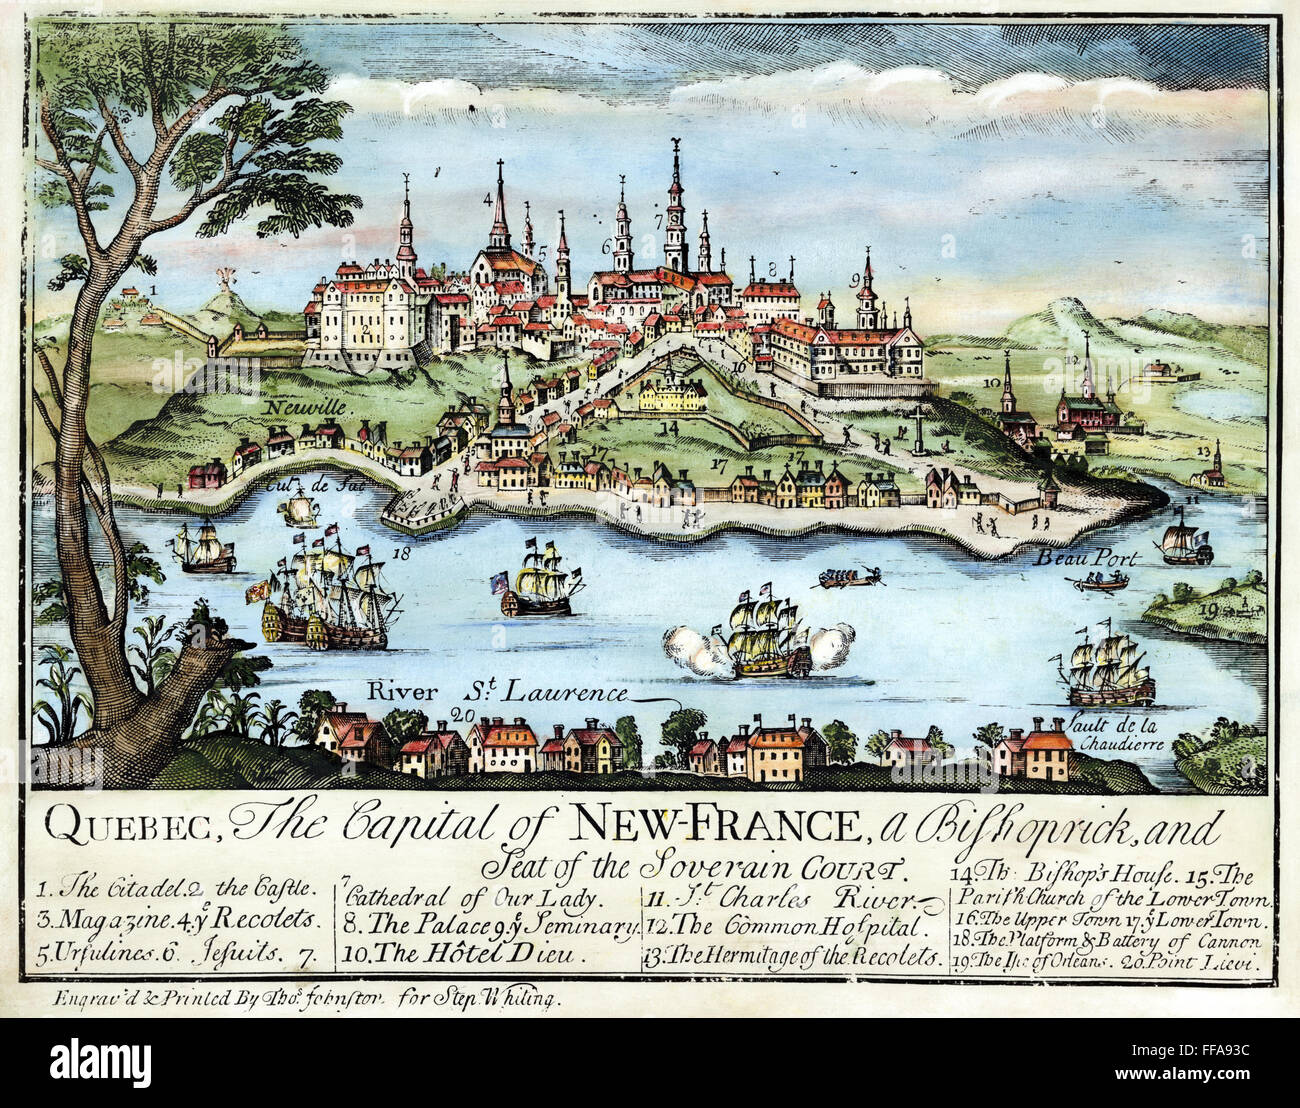 QUEBEC, NEW FRANCE./nThe earliest American engraved view of Quebec, 1758. Stock Photo